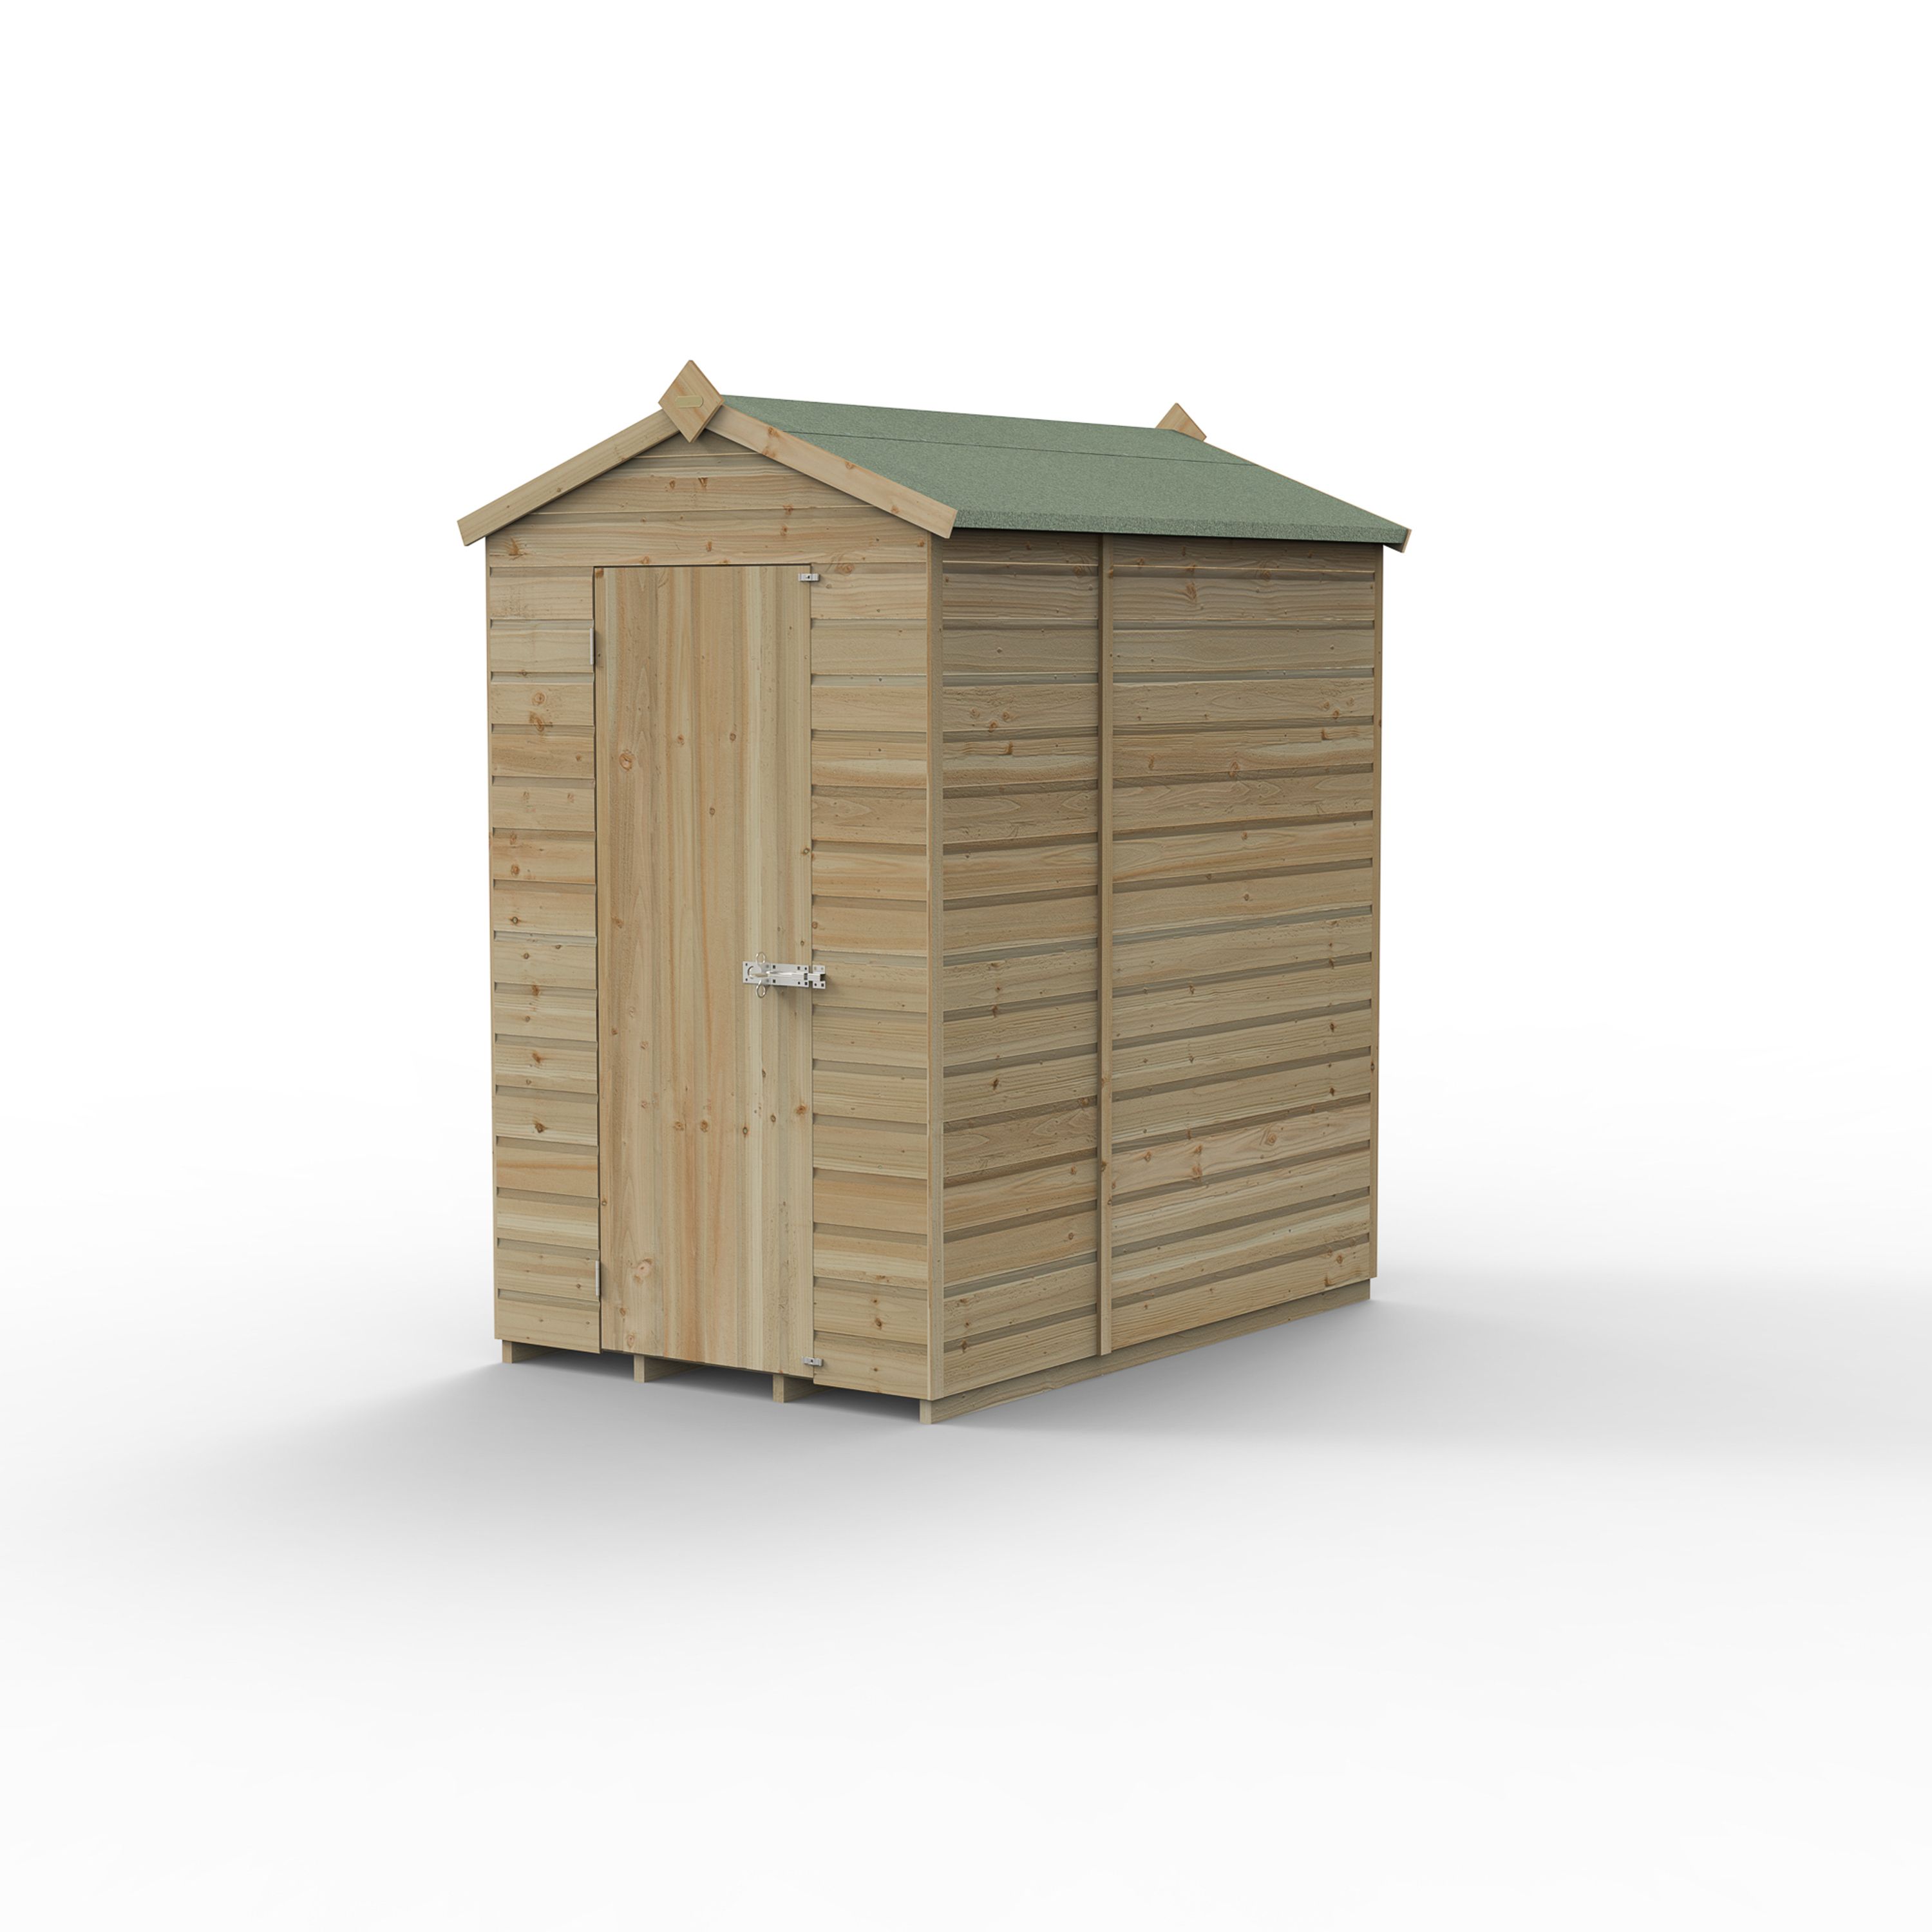 Forest Garden Beckwood 6x4 ft Apex Natural timber Wooden Shed with floor (Base included) - Assembly not required